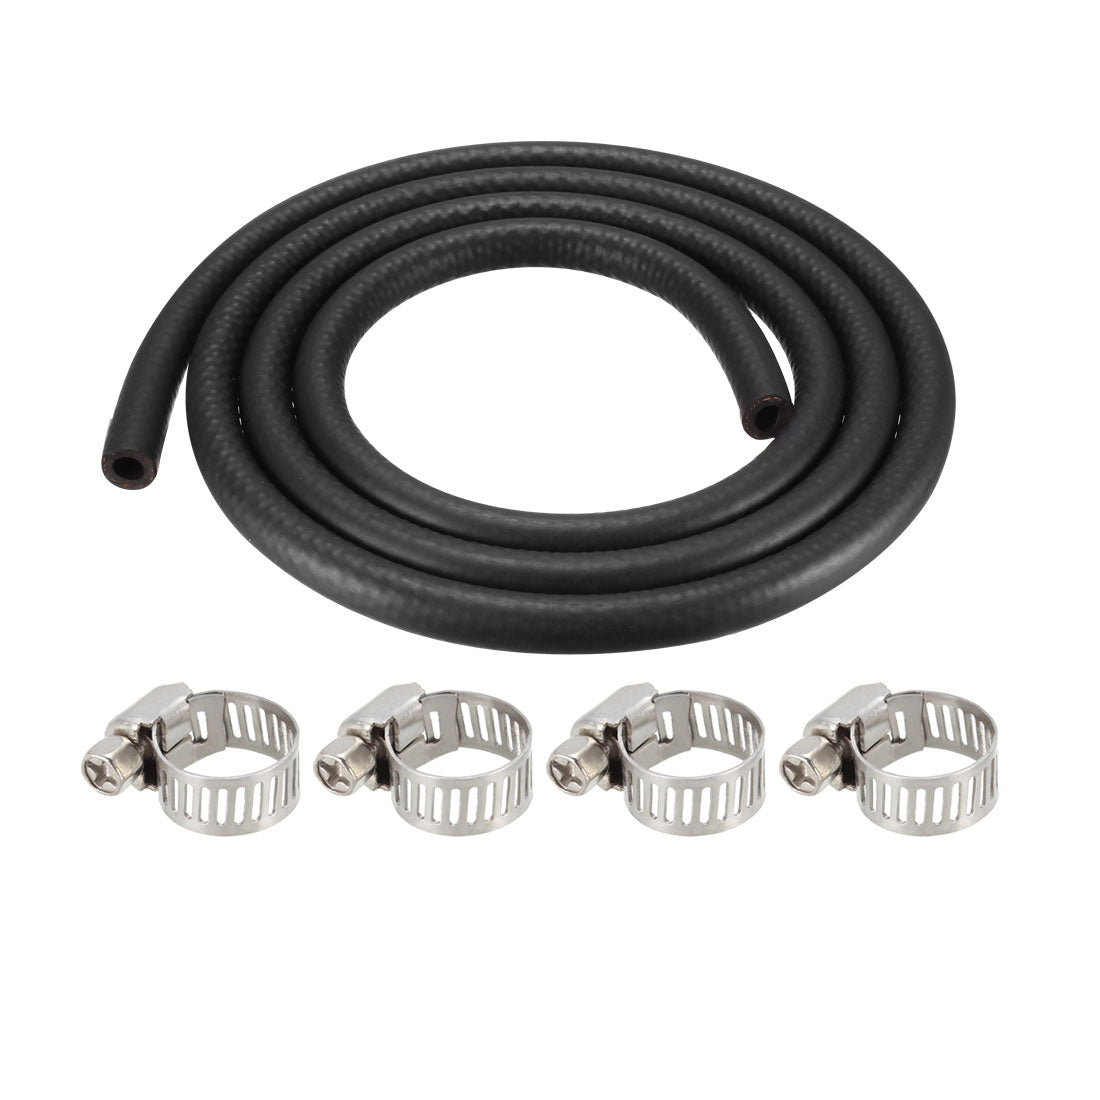 uxcell Uxcell Fuel Line Fuel Hose Rubber  8mm I.D.  1.8M/5.9FT  Diesel Petrol Hose Engine Pipe Tubing with 4 Clamps